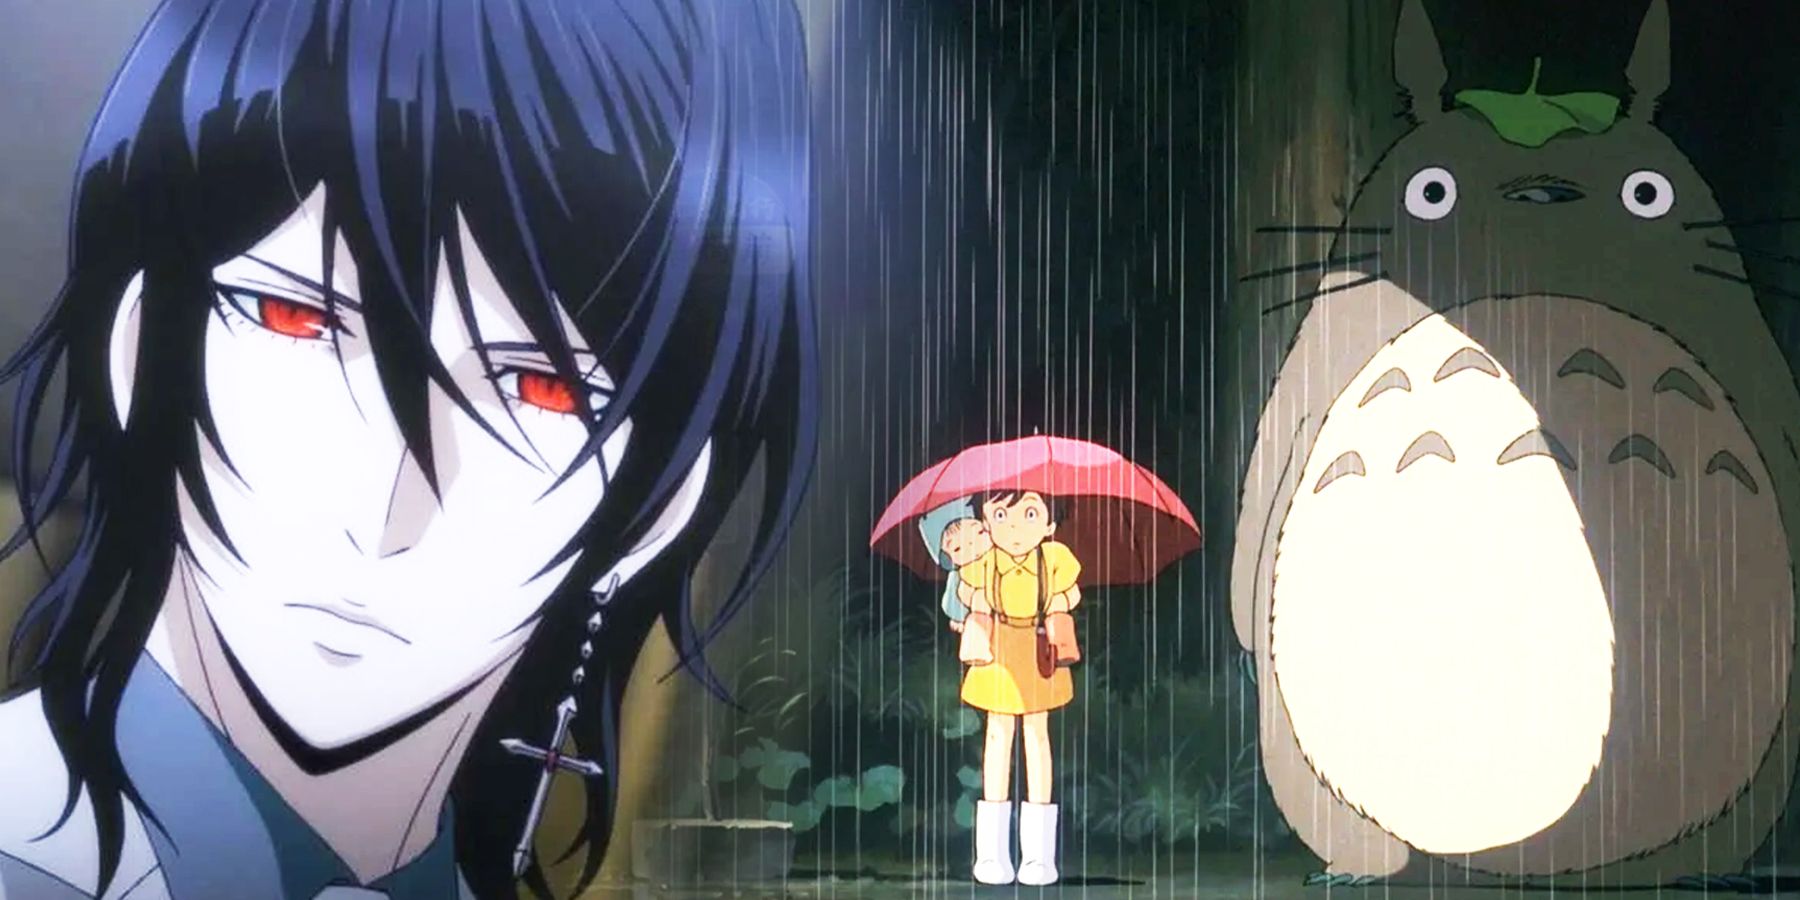 On the left, Raizel of anime 'Noblesse' stares out intensely with red eyes. On the right, Totoro stands at a rainy bus stop with Satsuki and her little sister Mei.